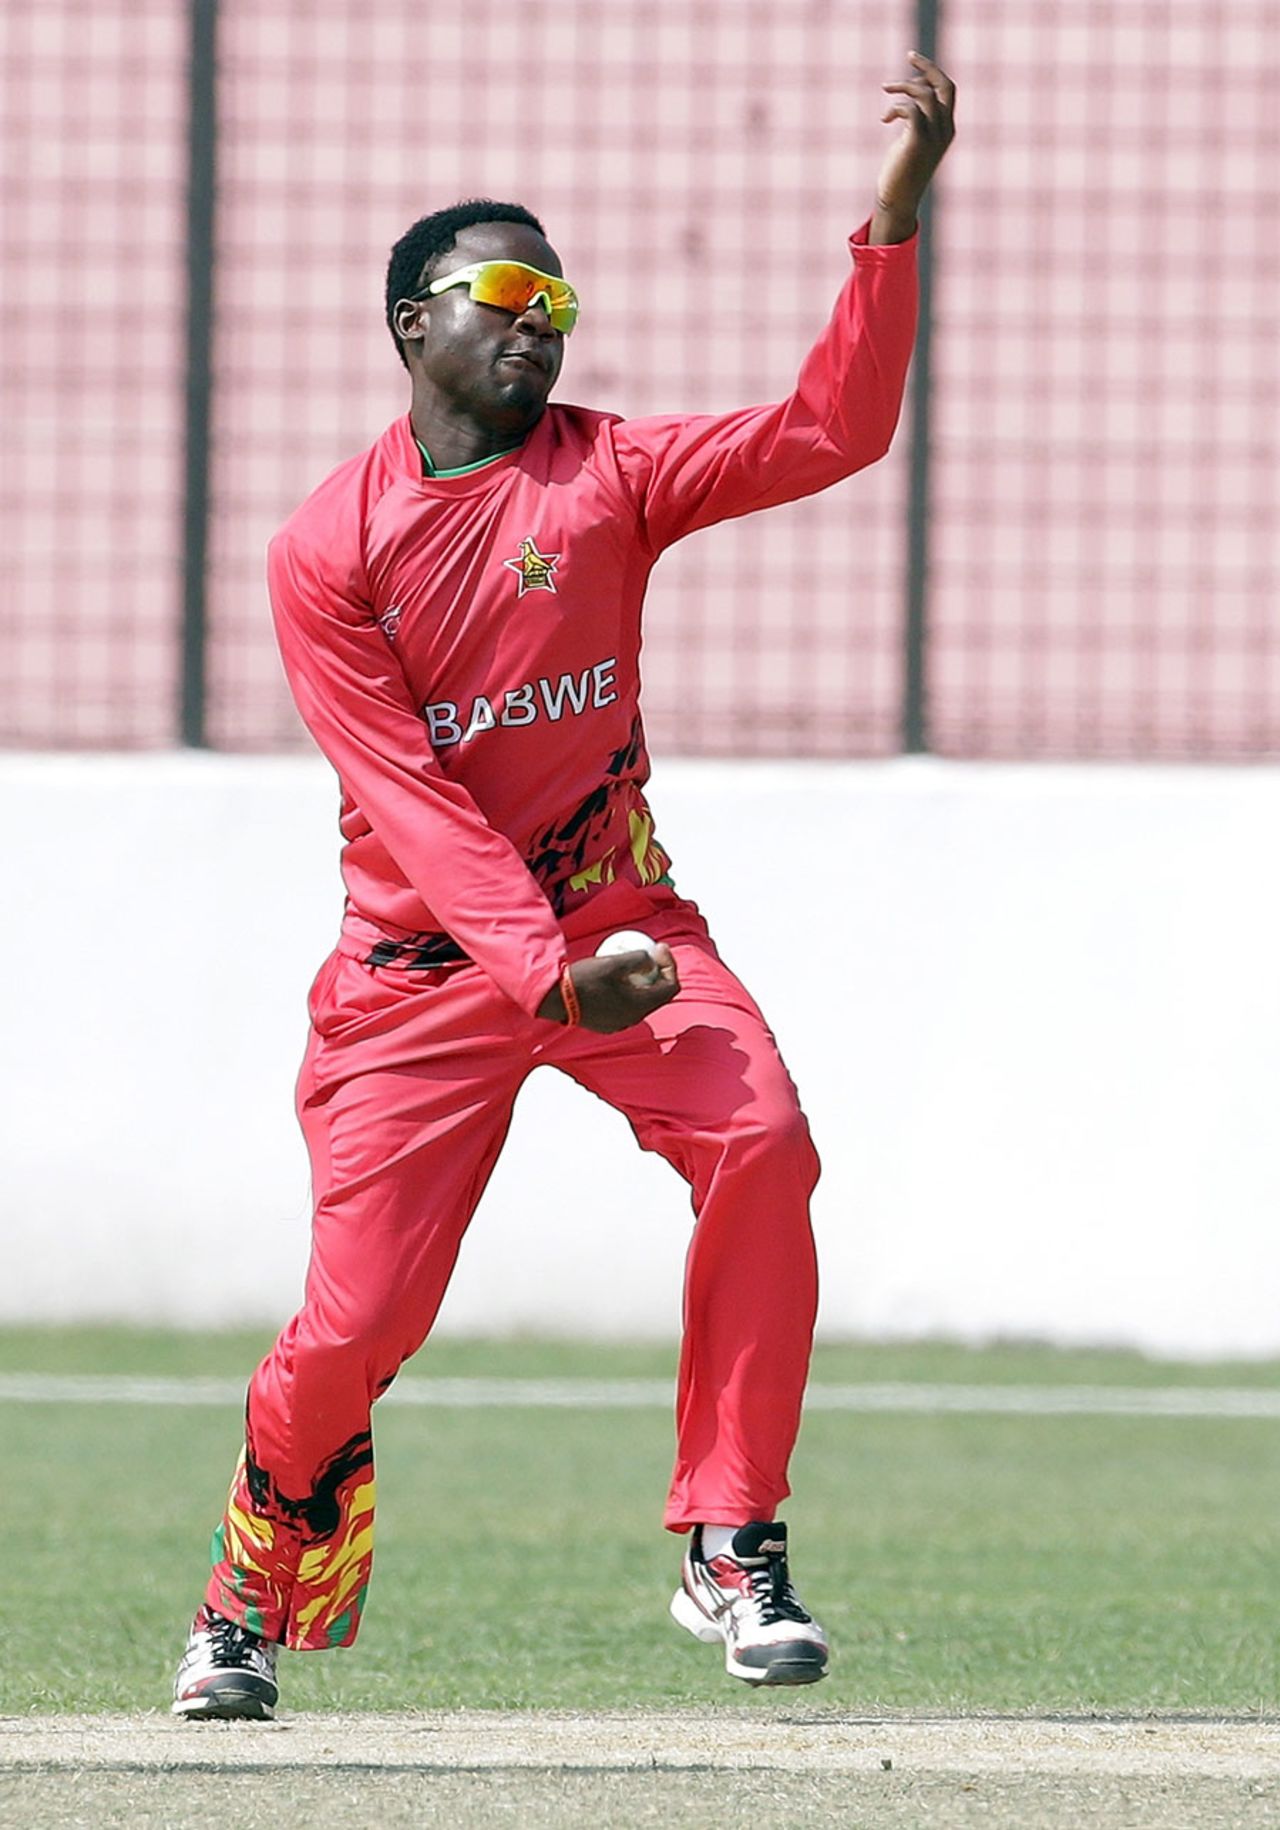 Natsai M'Shangwe in his delivery stride, Afghanistan v Zimbabwe, World T20 warm-up match, Chittagong, March 14, 2014